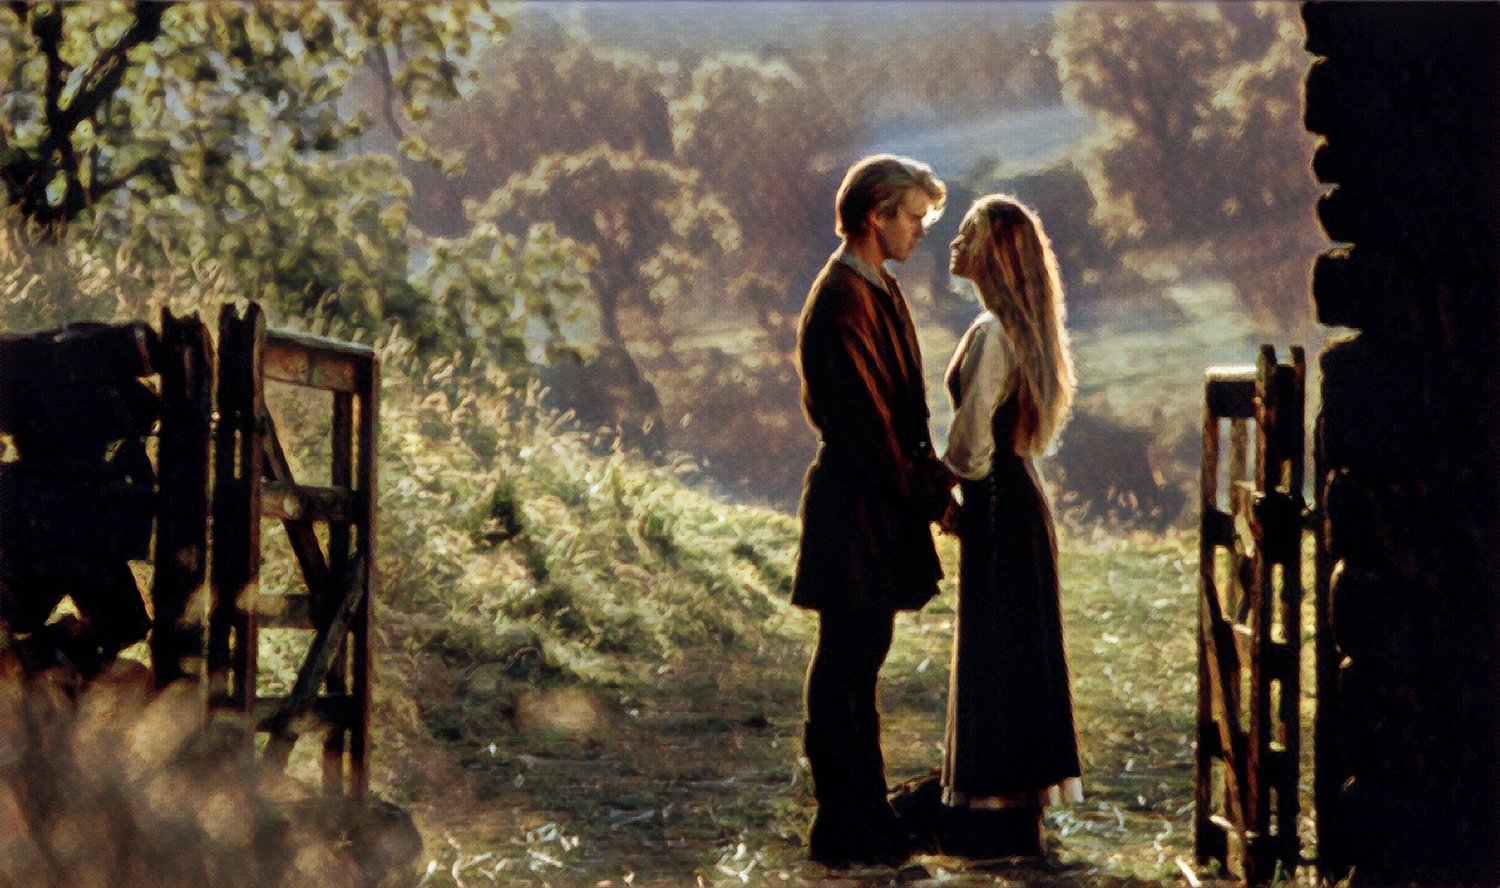 The Princess Bride, minutes 52 to 54